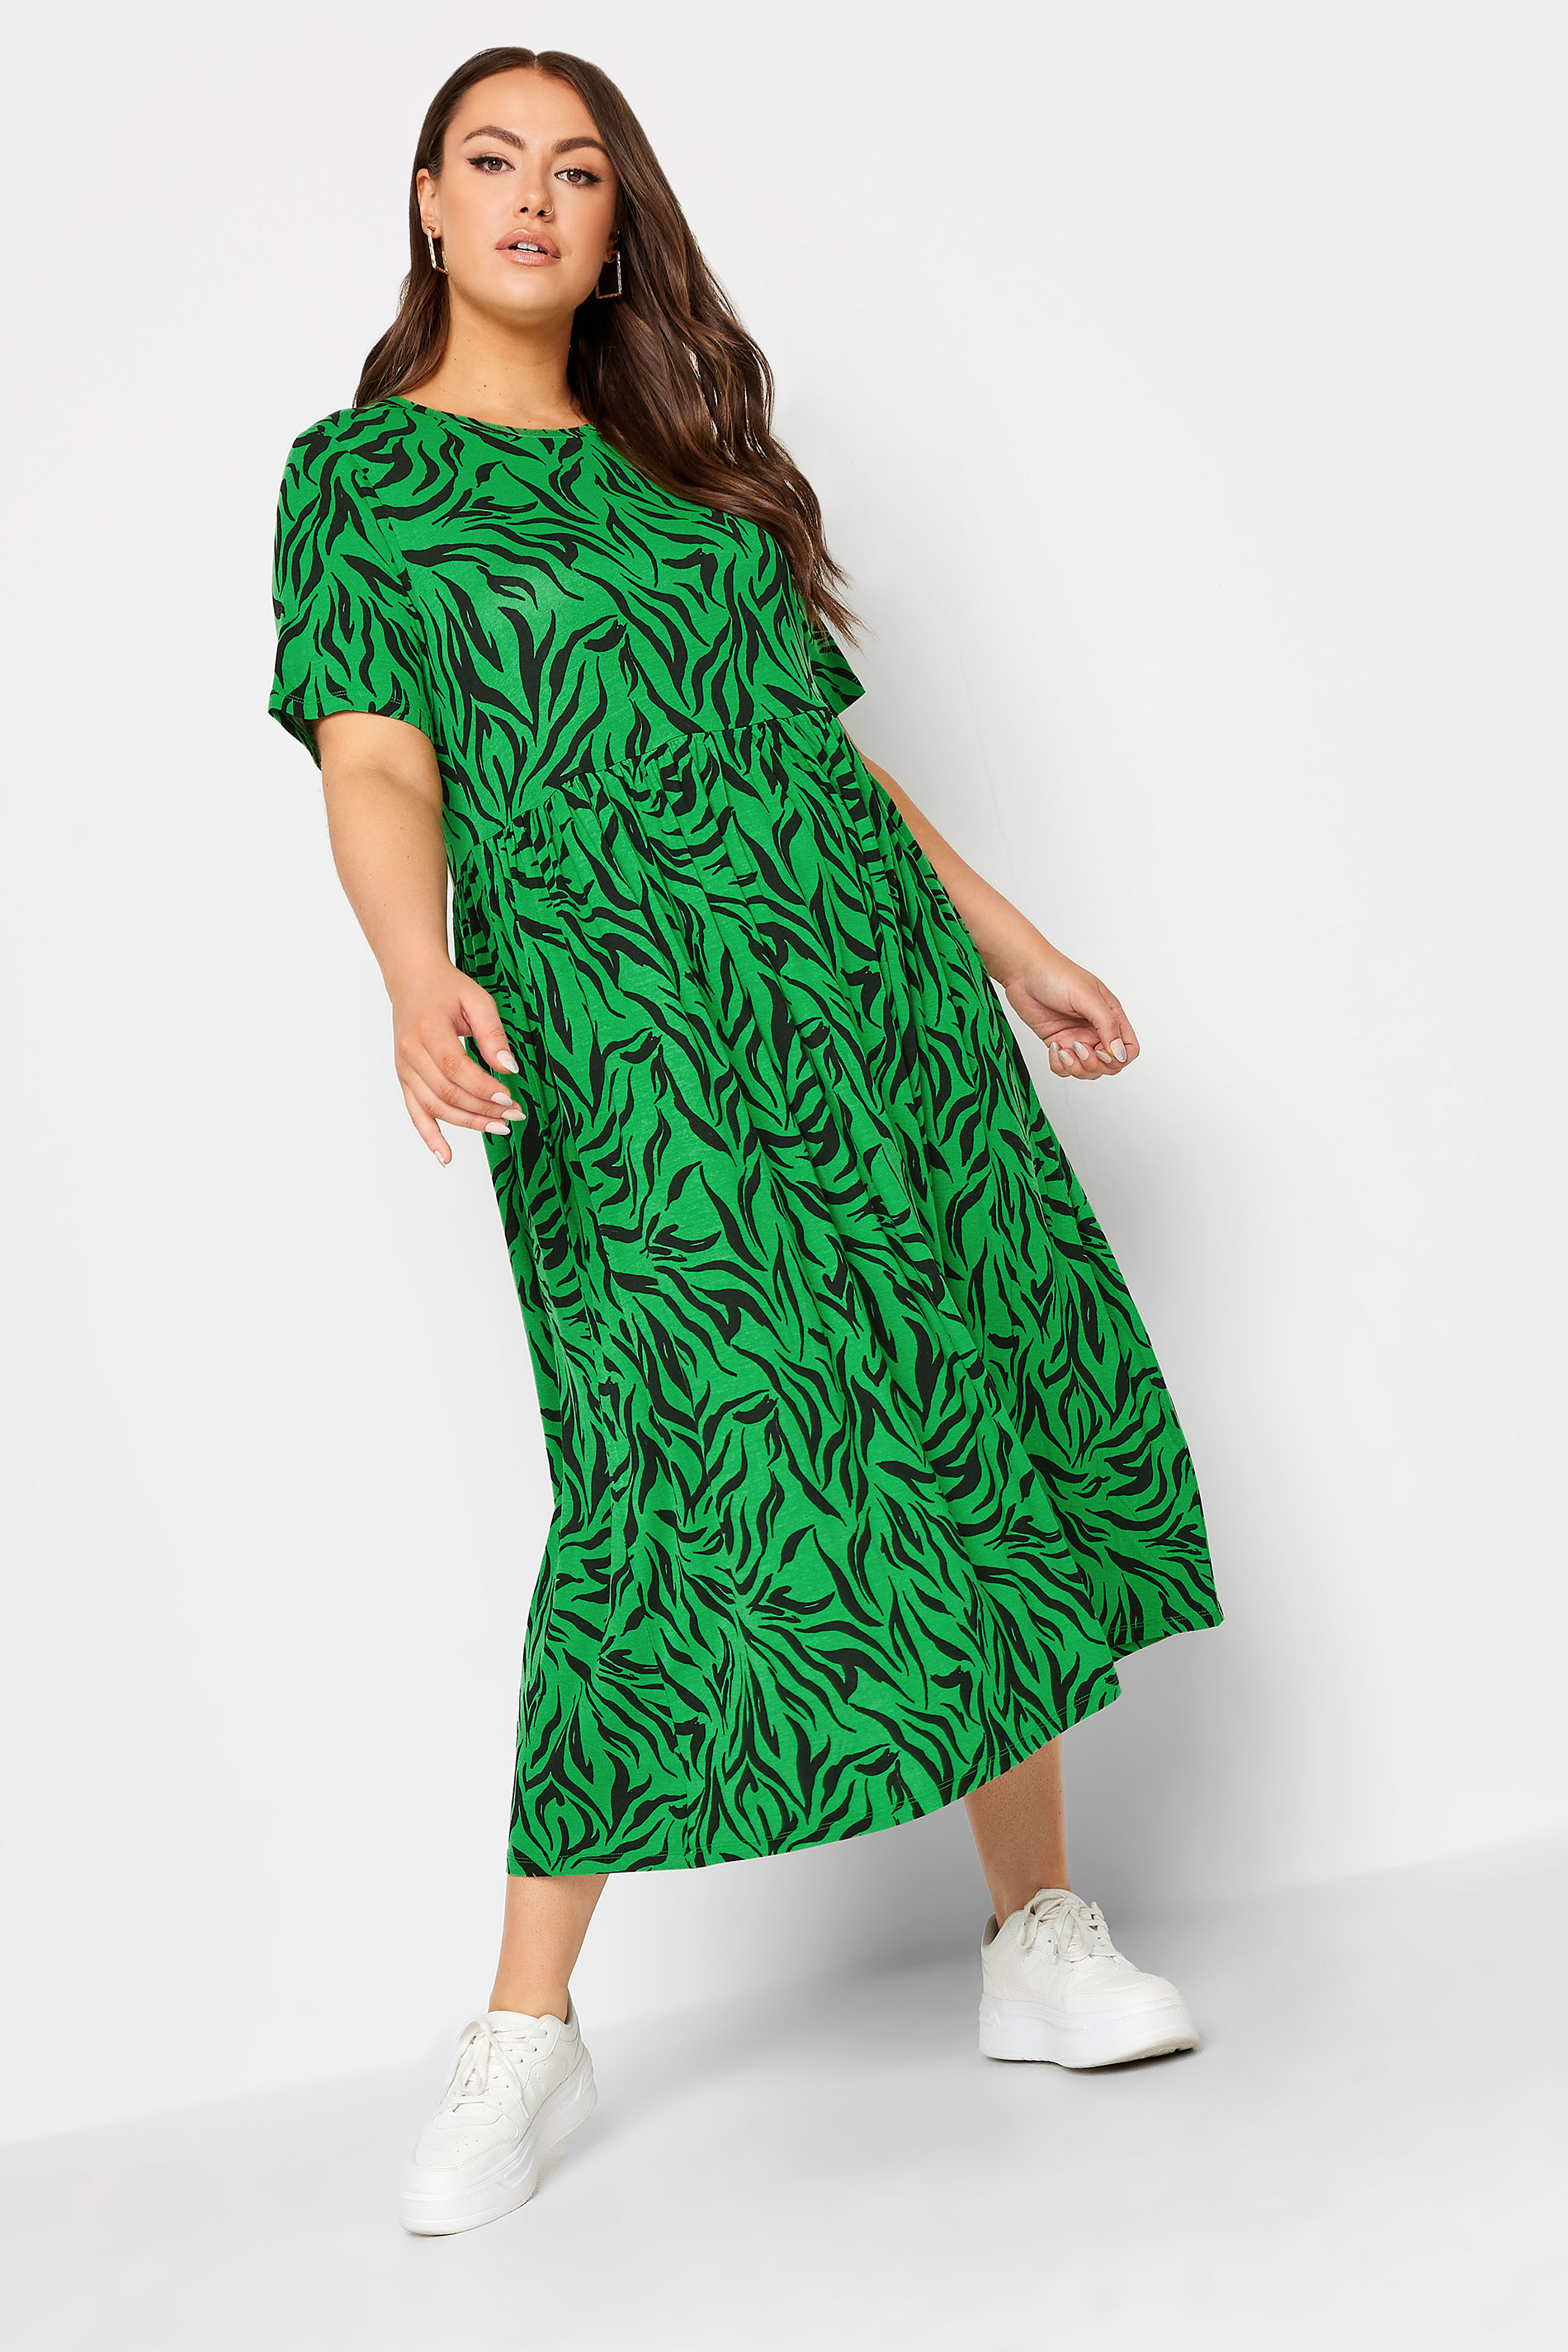 YOURS Plus Size Green Zebra Print Throw On Midaxi Dress | Yours Clothing 1